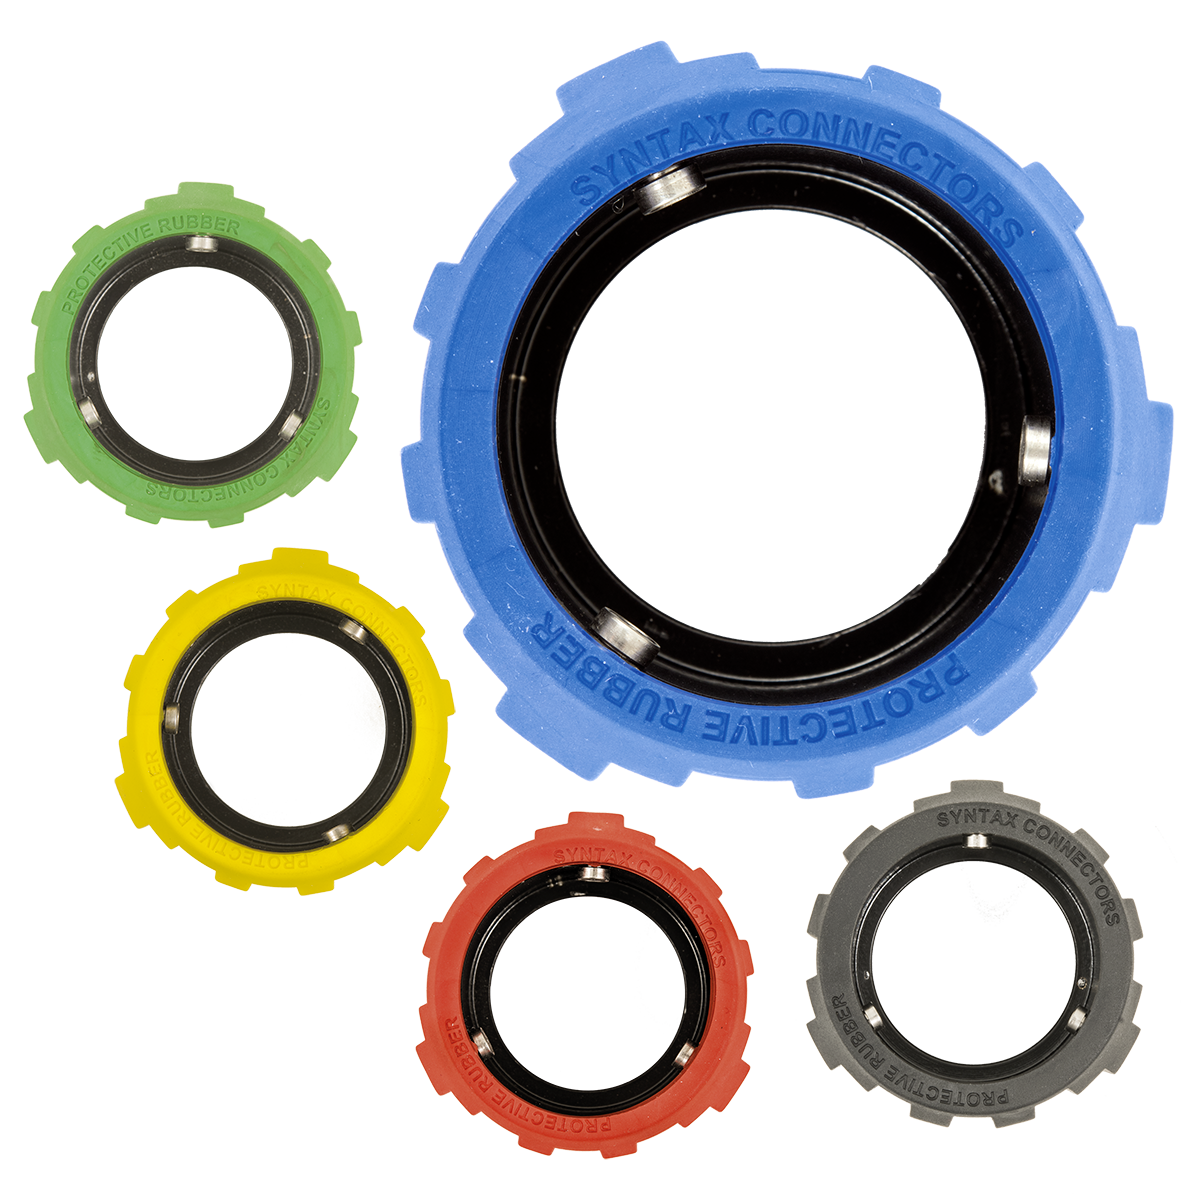 Rubber coated
locking rings